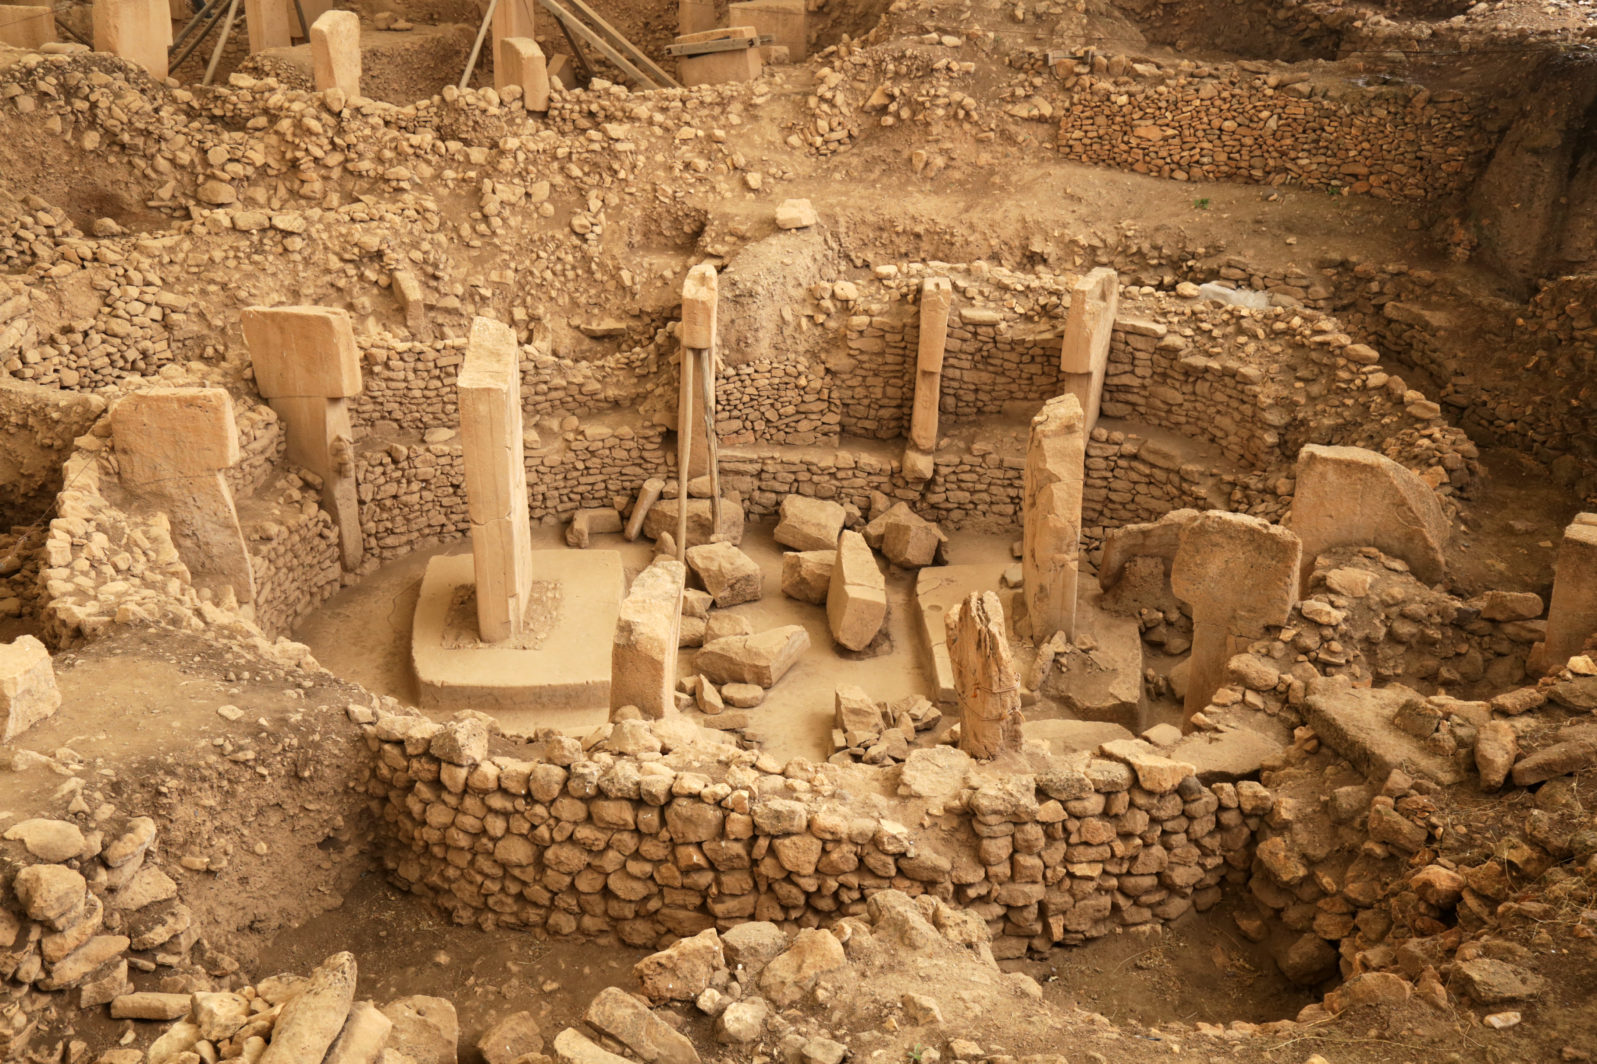 Ritual circle in the oldest temple of world - Gobeklitepe. October 2019.